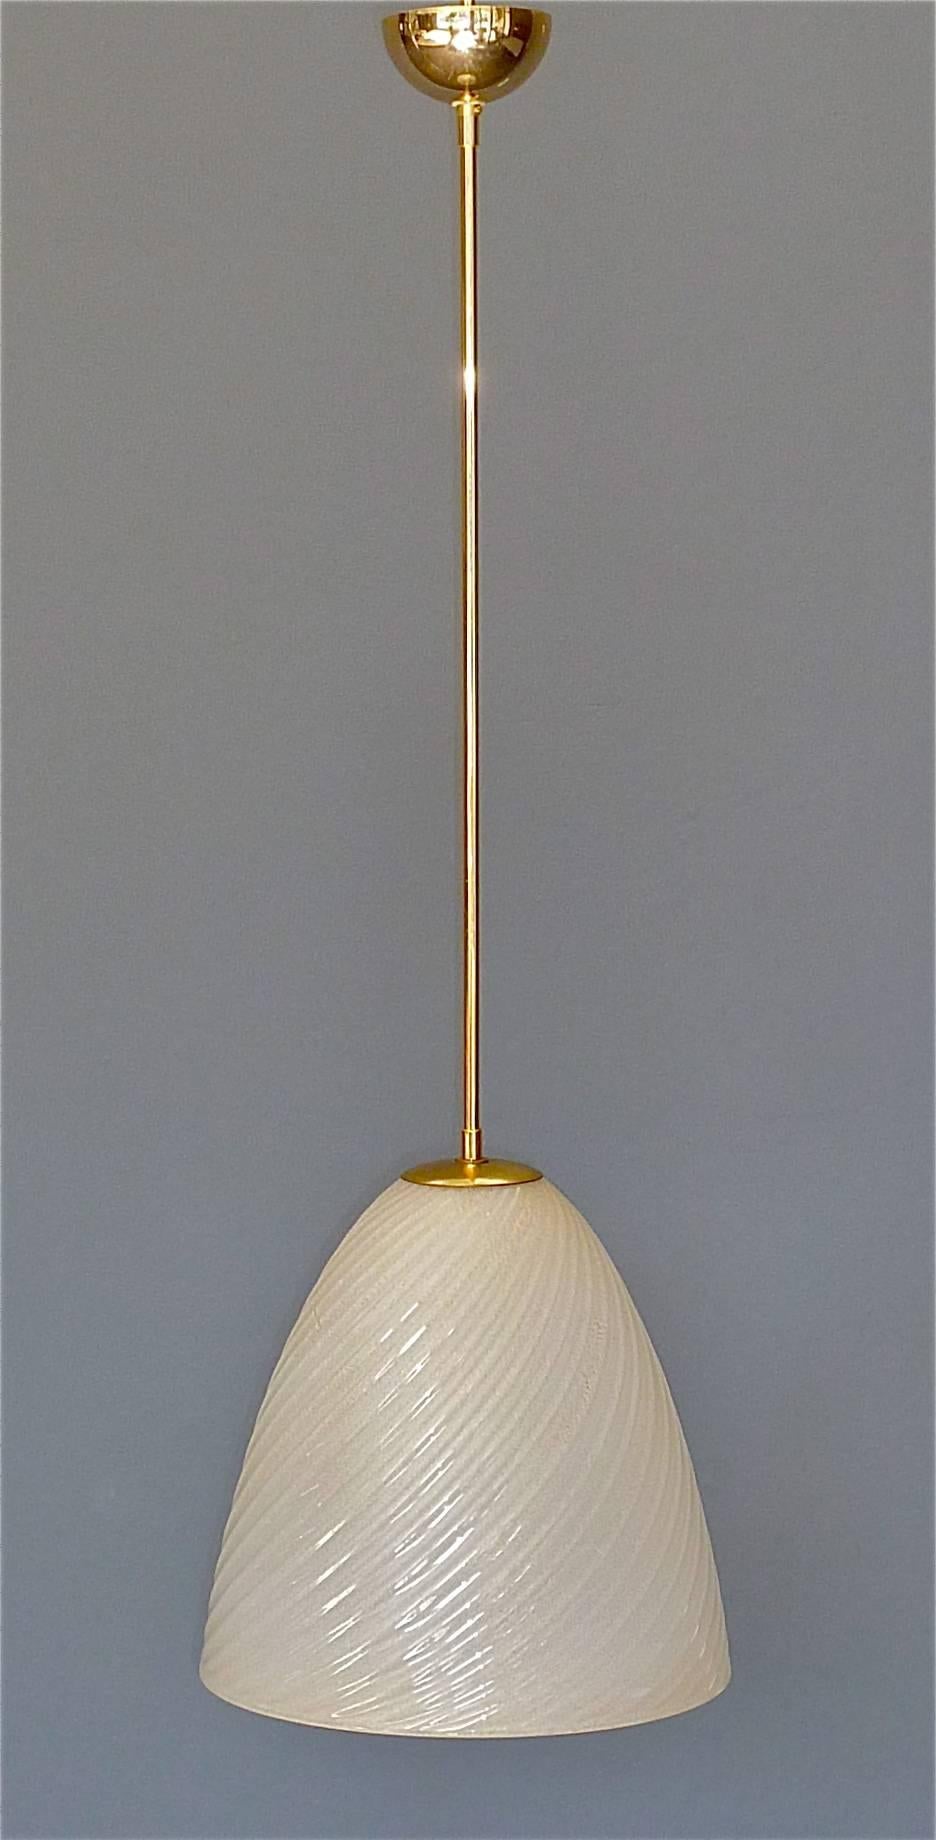 Large and fine handcrafted Murano art glass pendant lamp, Italy, circa 1950-1960 by Archimede Seguso for Seguso Vetri Dárte. The big dome-shaped glass body has a width of 32 cm / 12.60 inches. and is 32 cm / 12.60 inches. tall. It is made of ivory